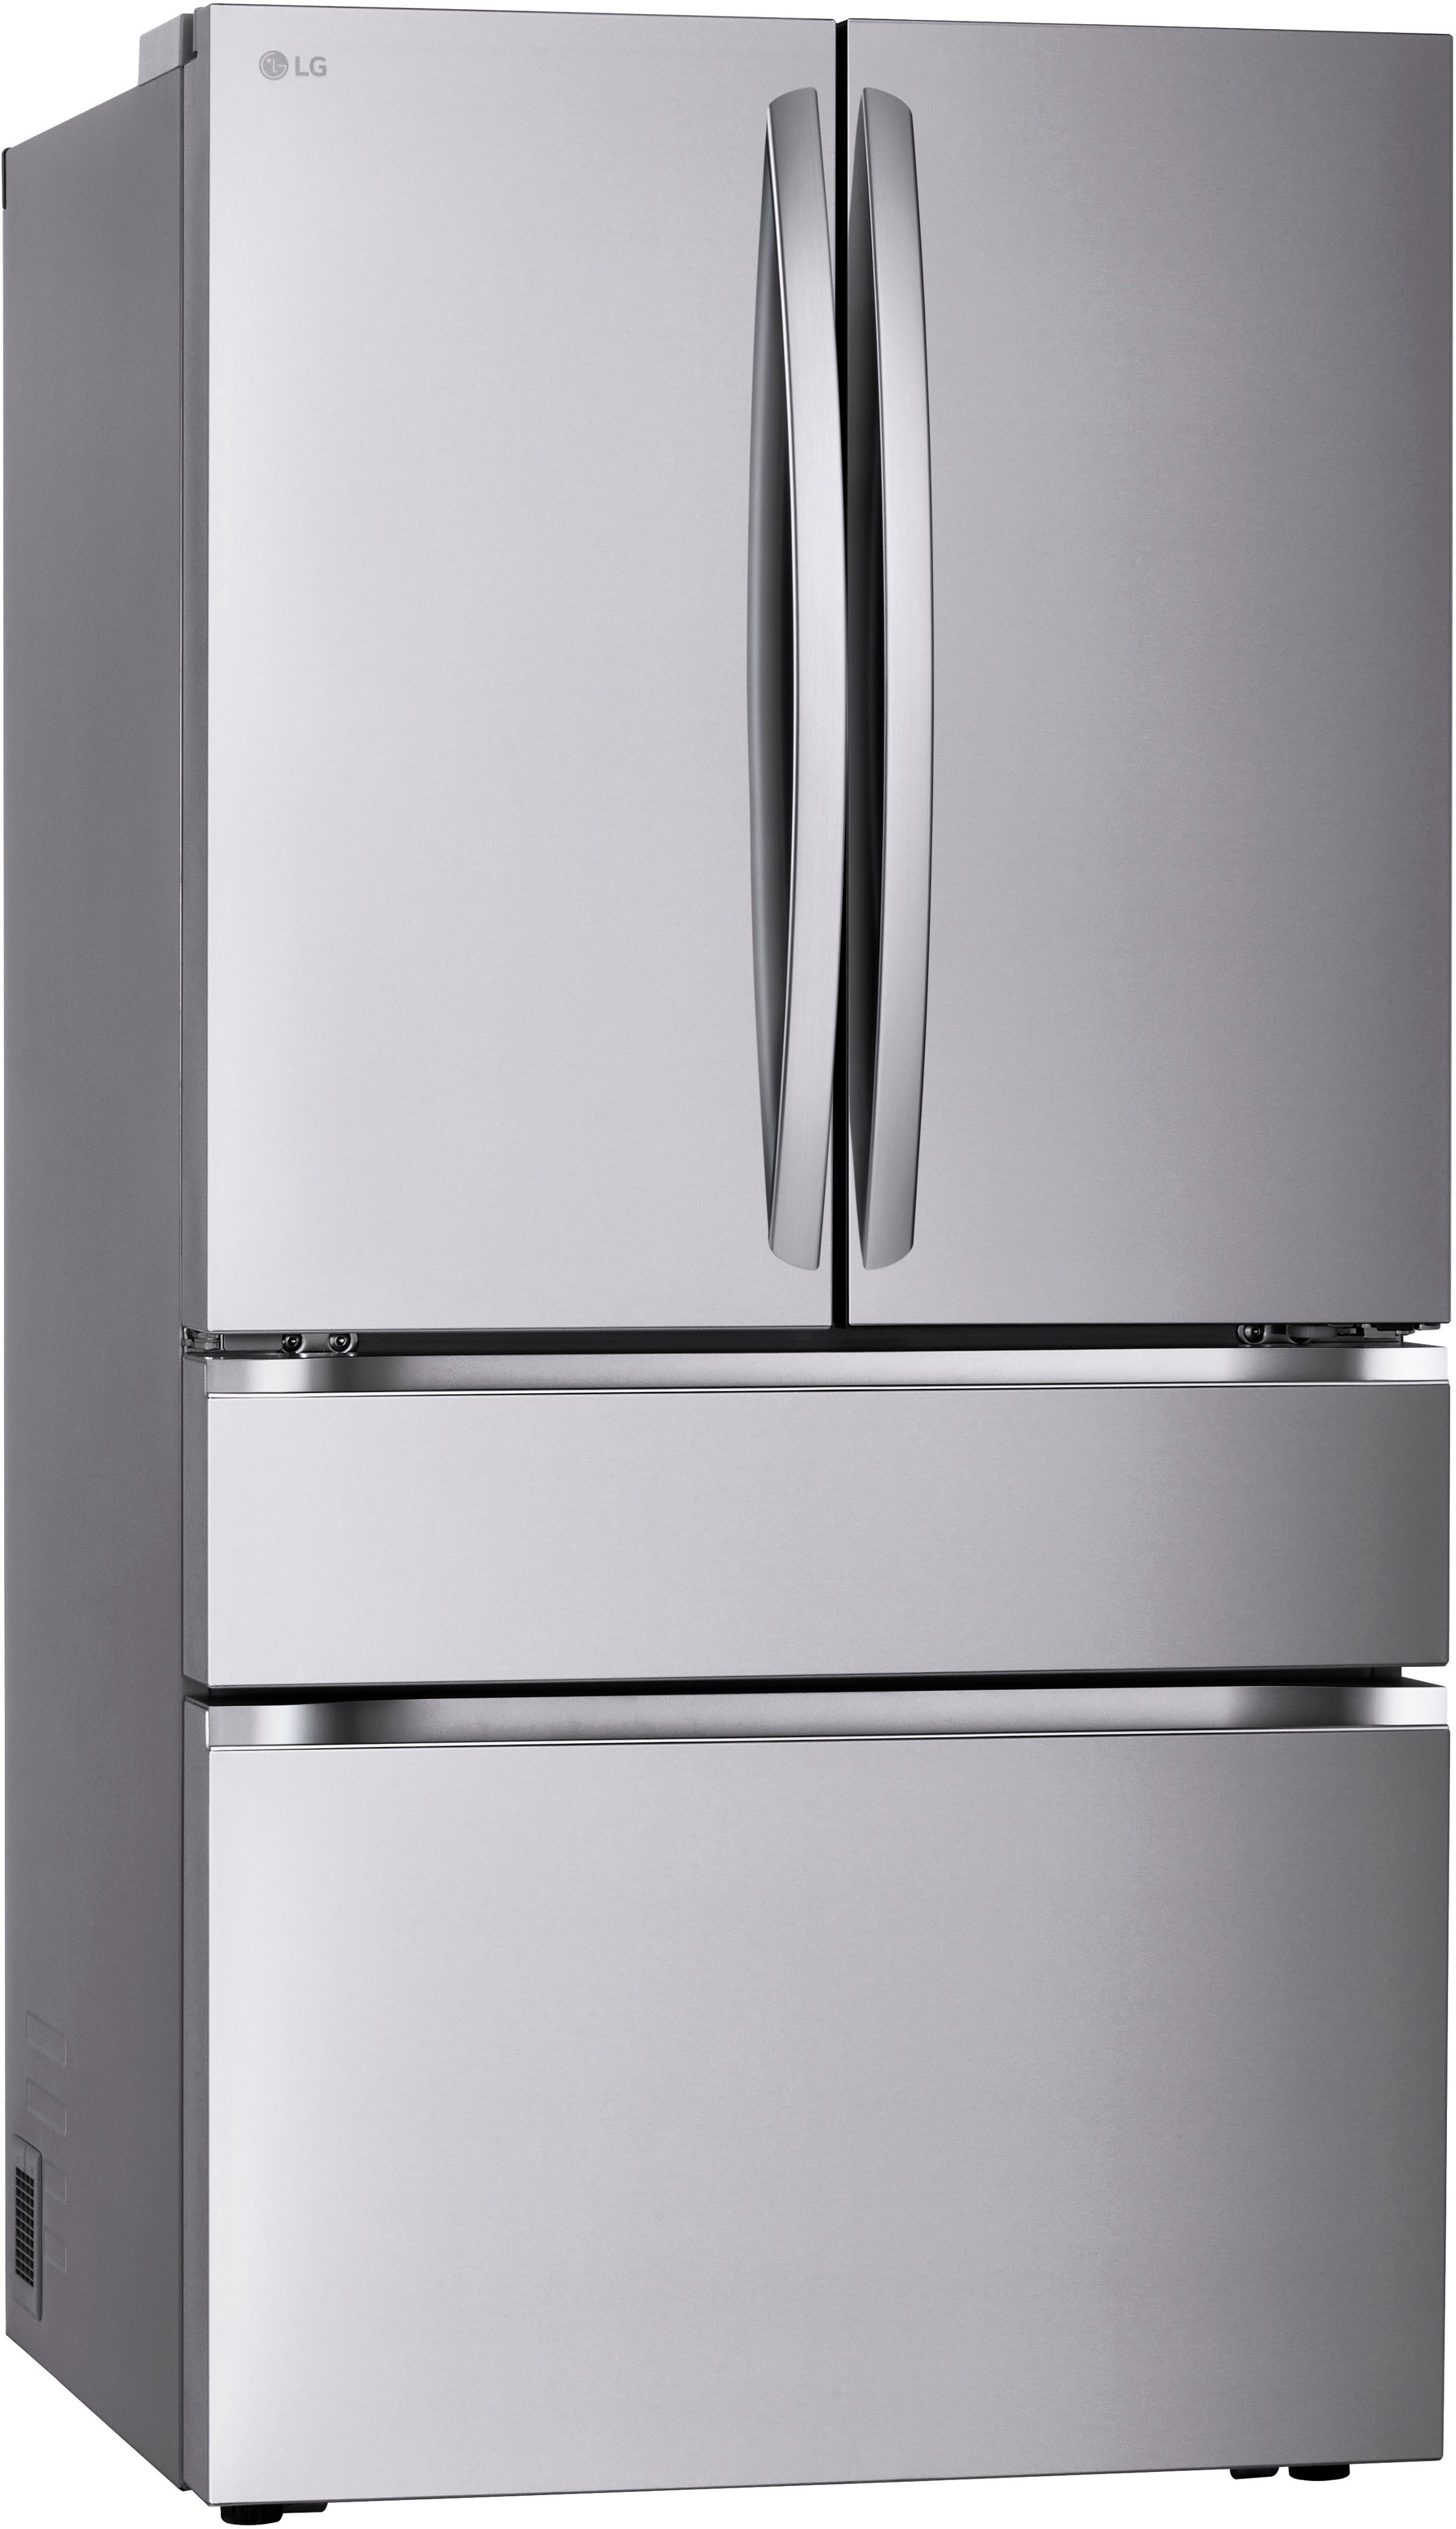 Angle View: LG - 29.6 Cu. Ft. French Door Smart Refrigerator with Full-Convert Drawer - Stainless Steel